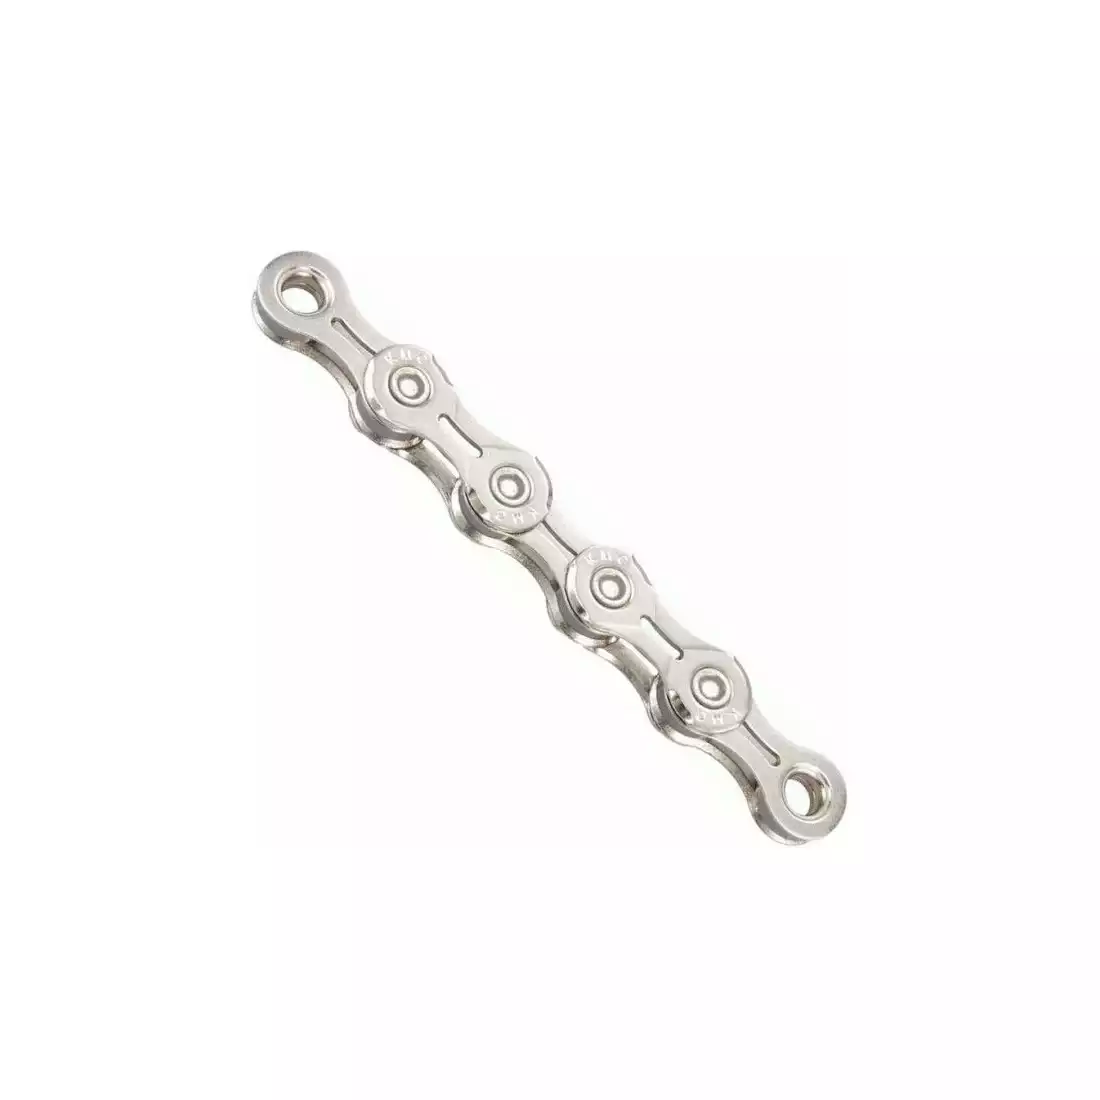 KMC X11 Bicycle chain 11-speed, 118 links, silver